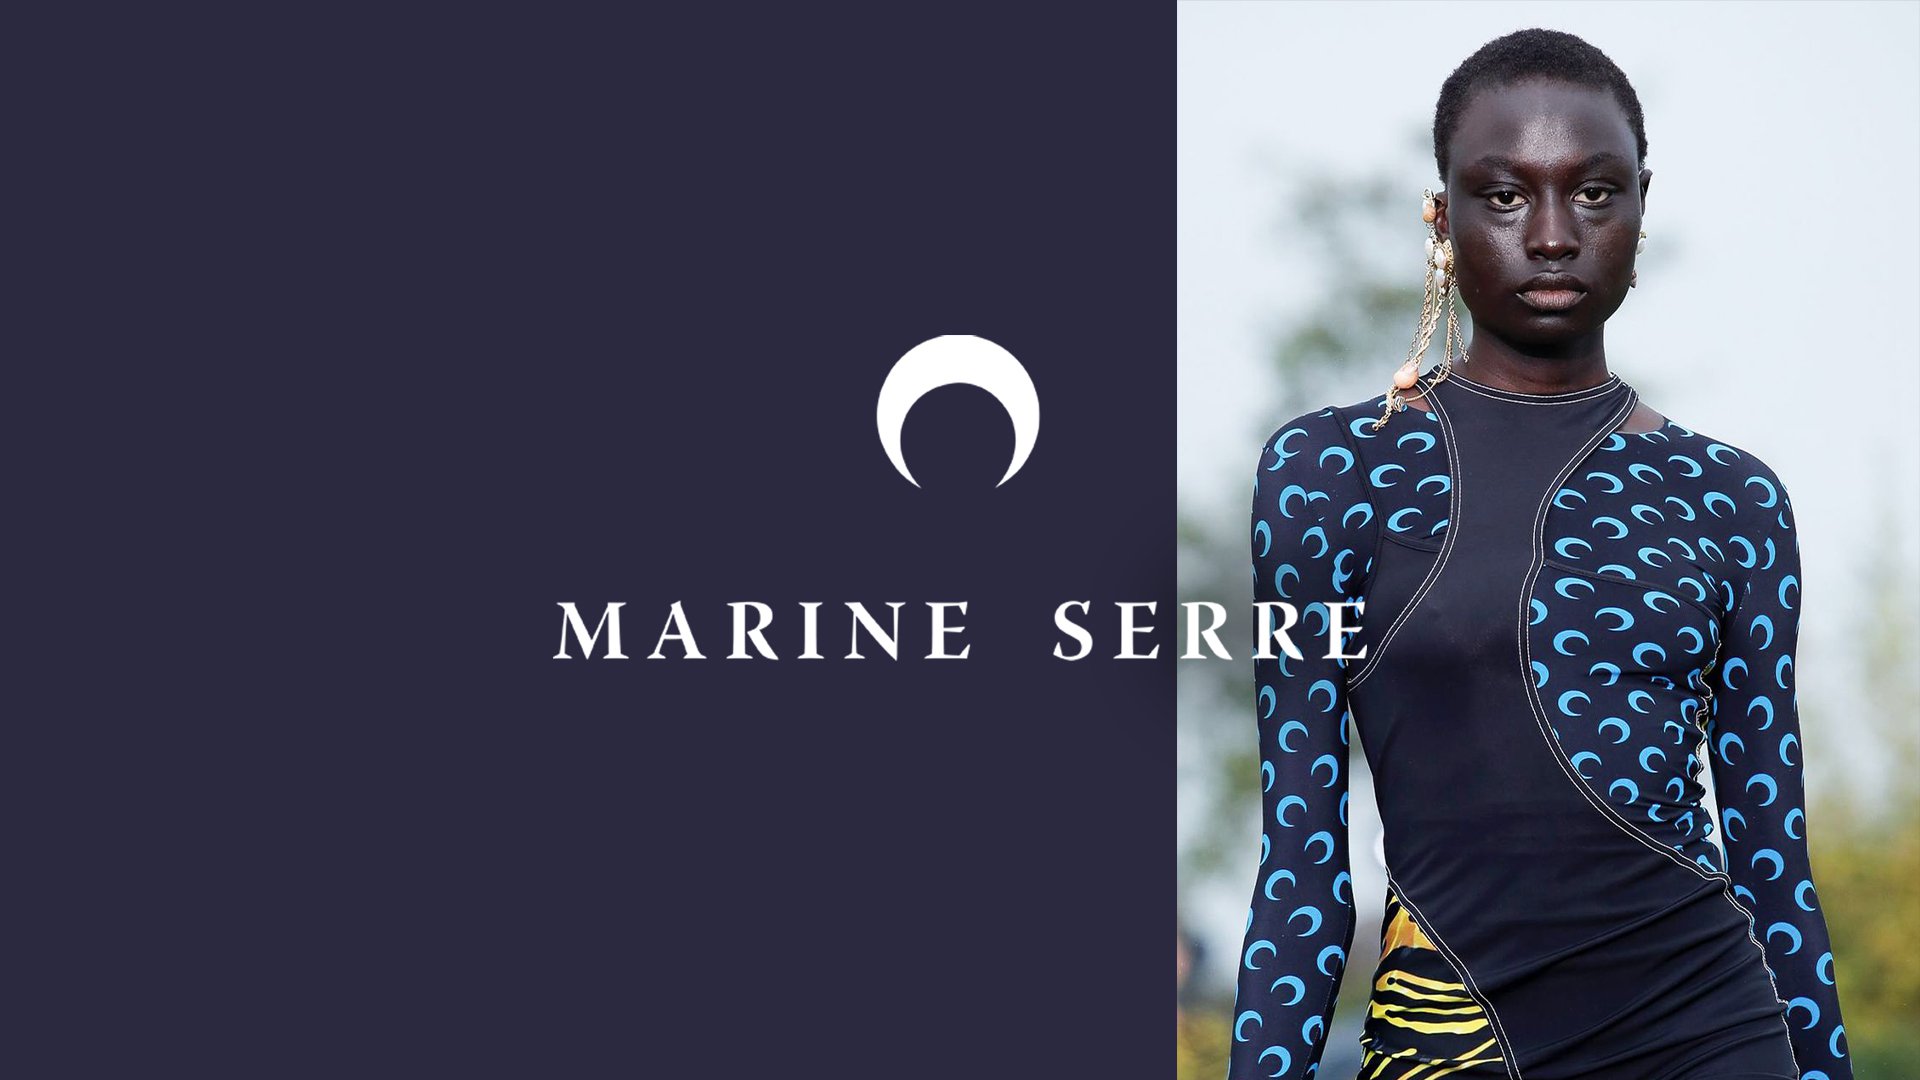 Marine Serre Defines The New Luxury With Upcycled Materials – TITLE MAG